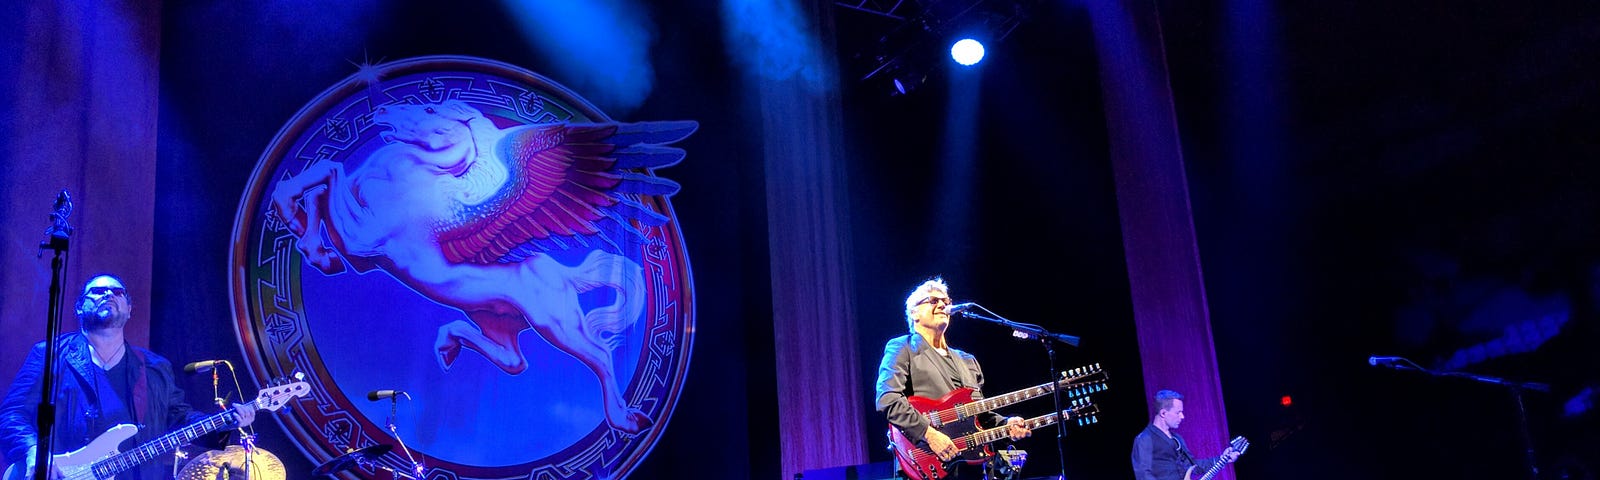 This shows the Steve Miller band playing on stage.